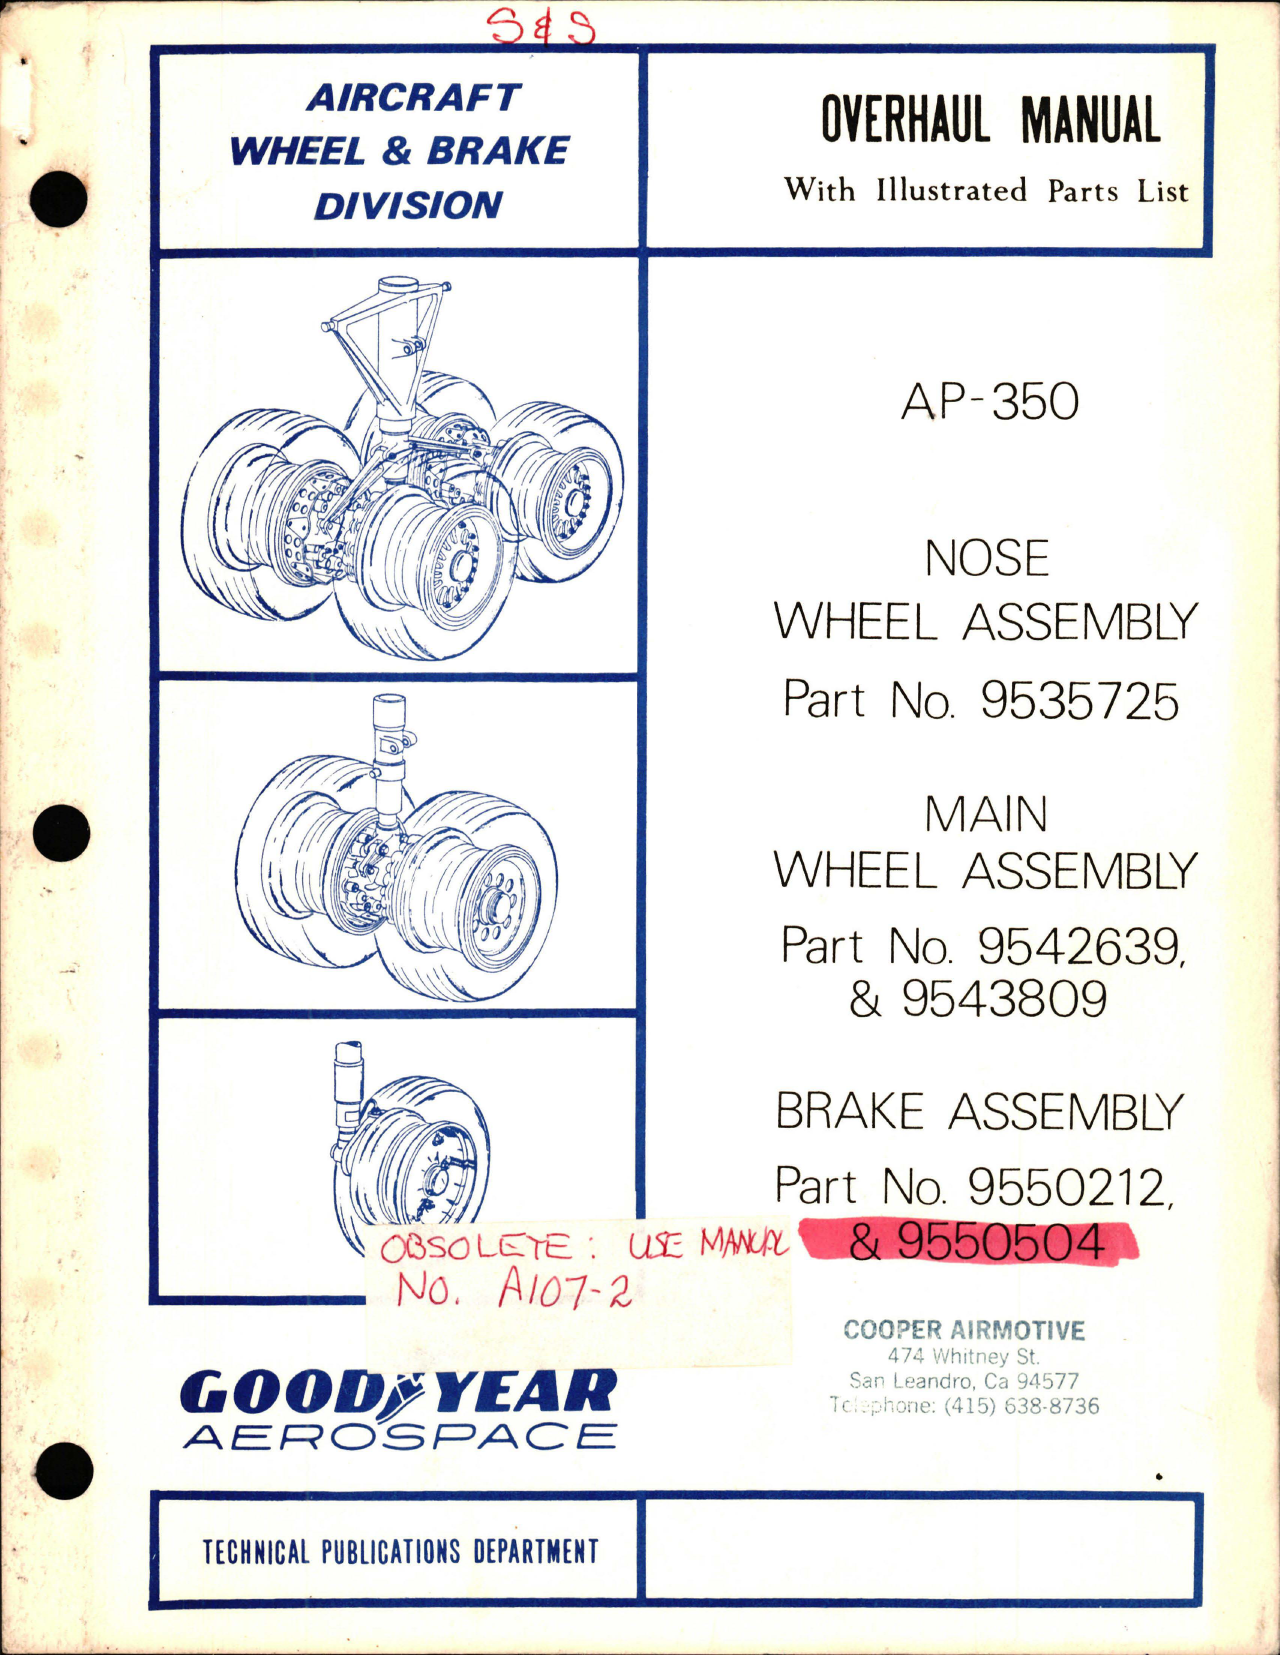 Sample page 1 from AirCorps Library document: Overhaul Manual with Illustrated Parts List for Nose Wheel, Main Wheel and Brake Assembly